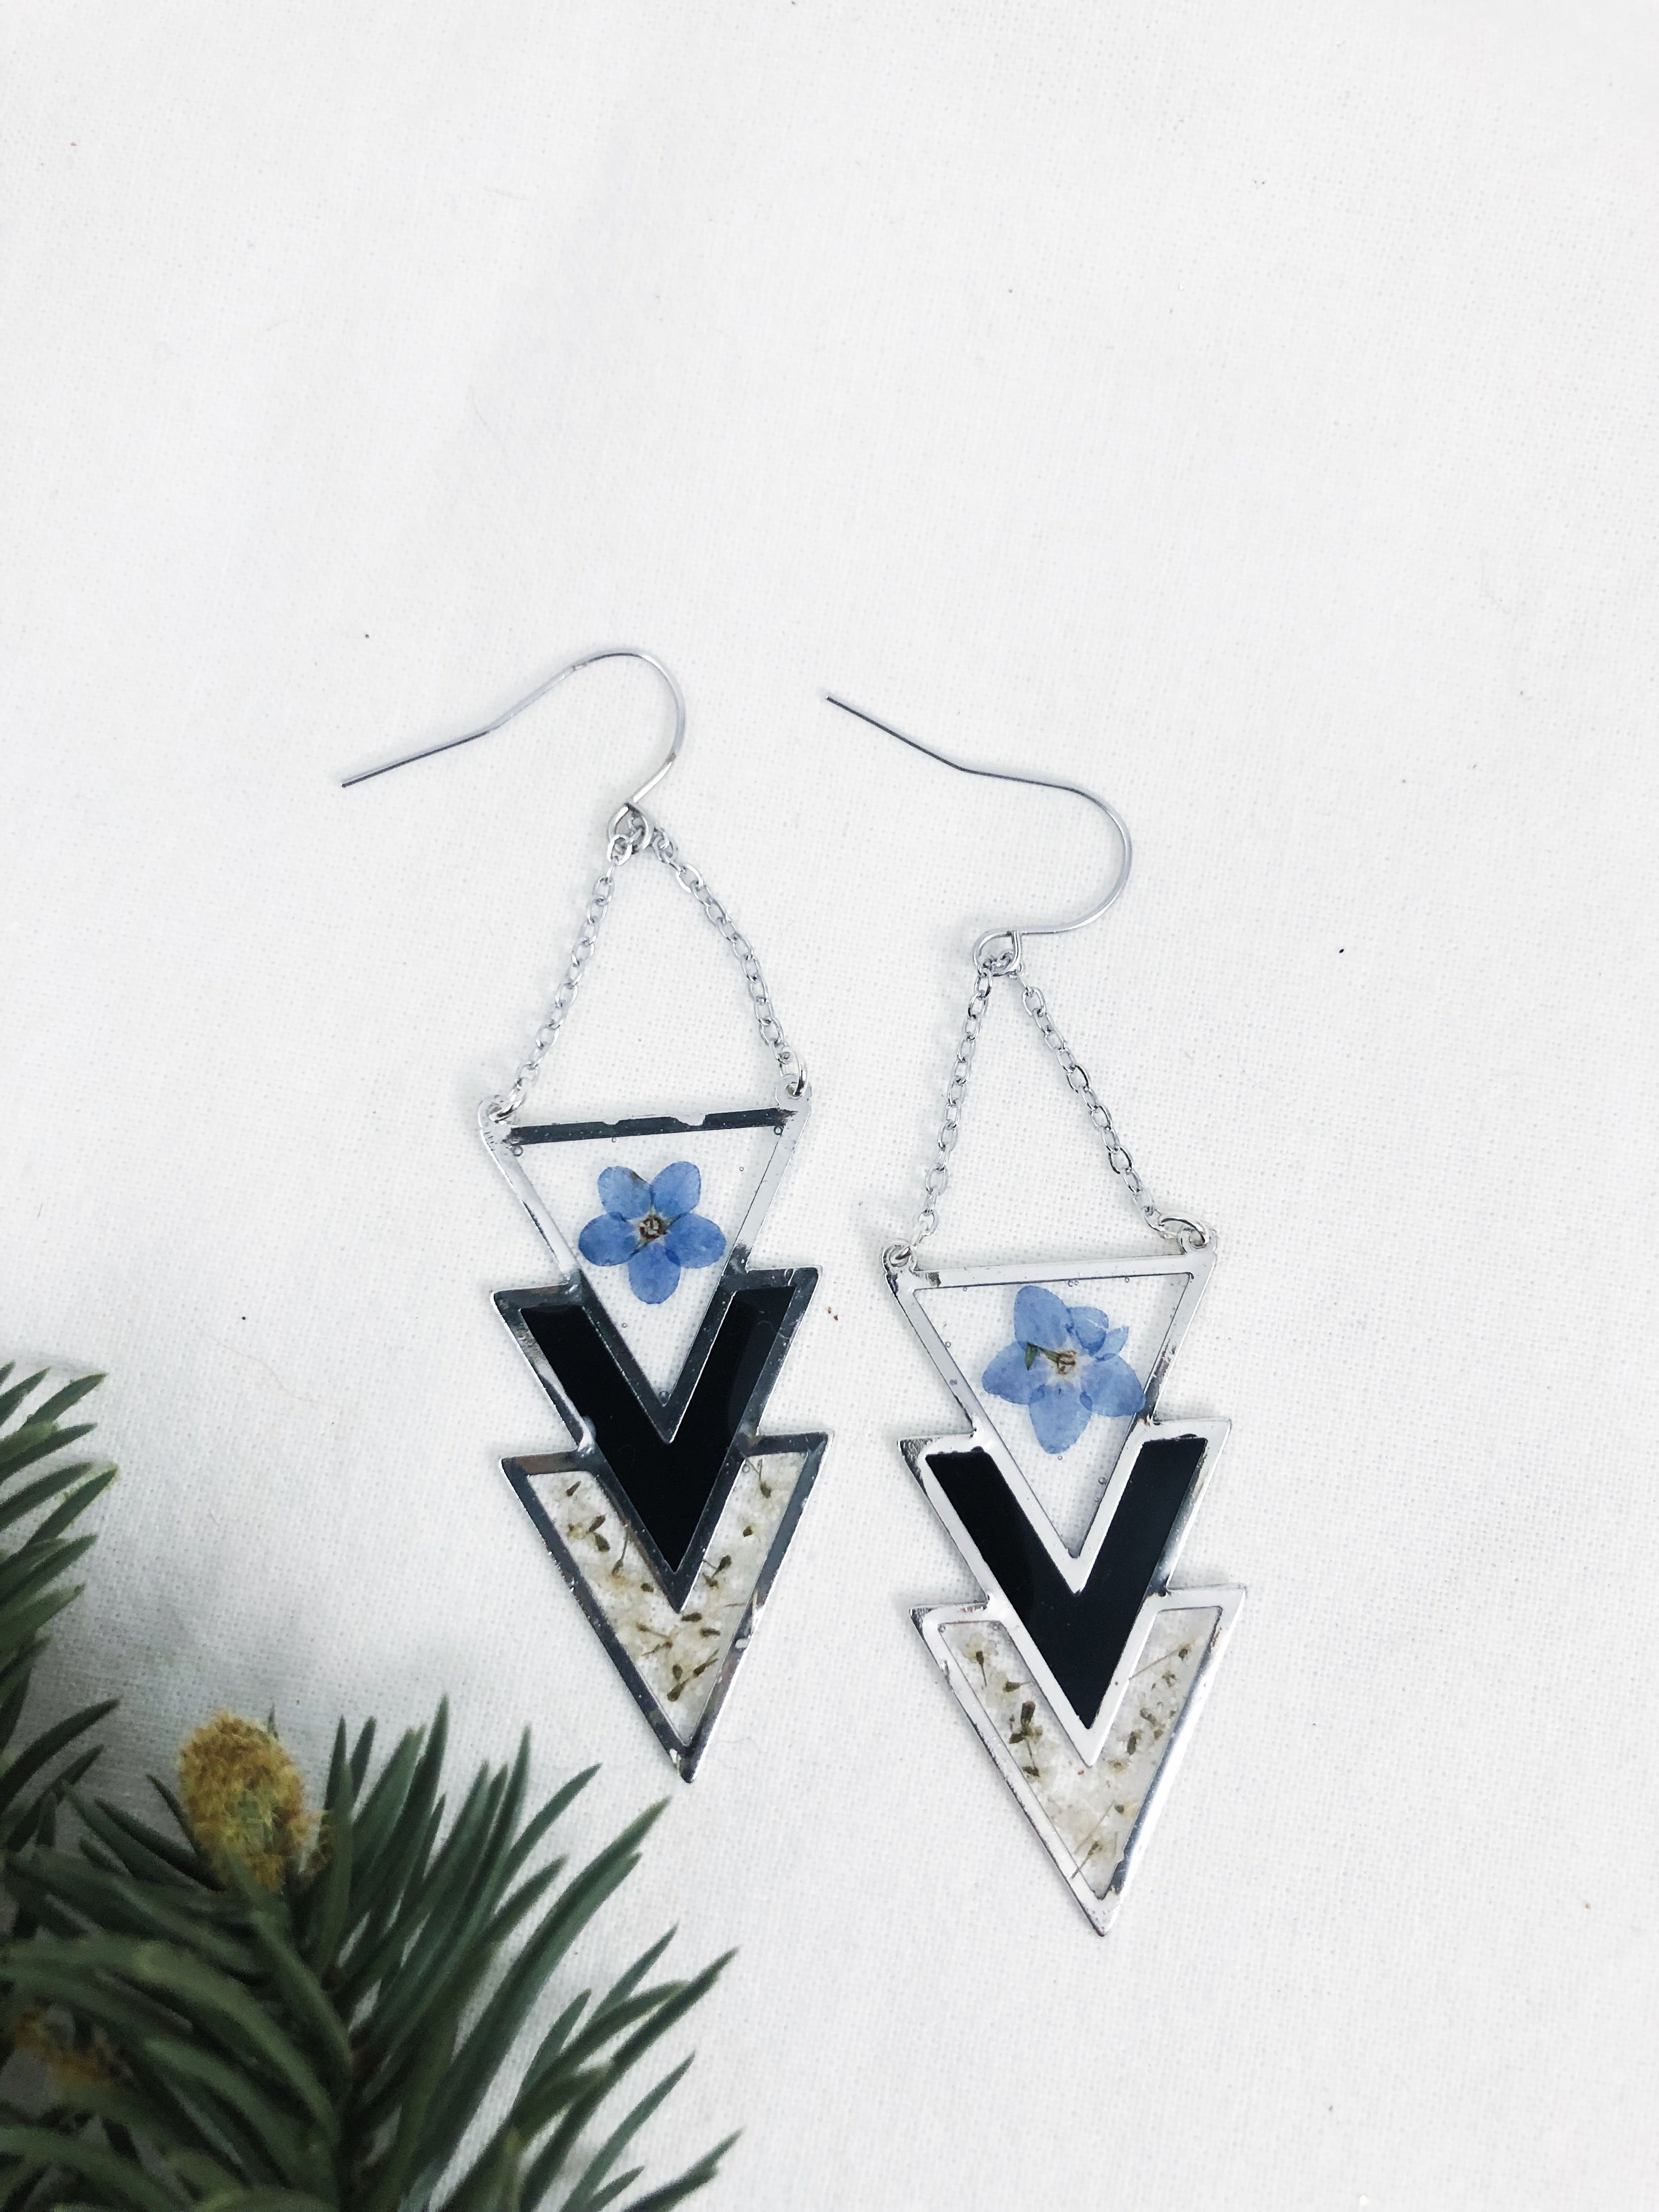 Winter Collection - Reyna - Silver Triangle Chain Earrings with Pressed Flowers